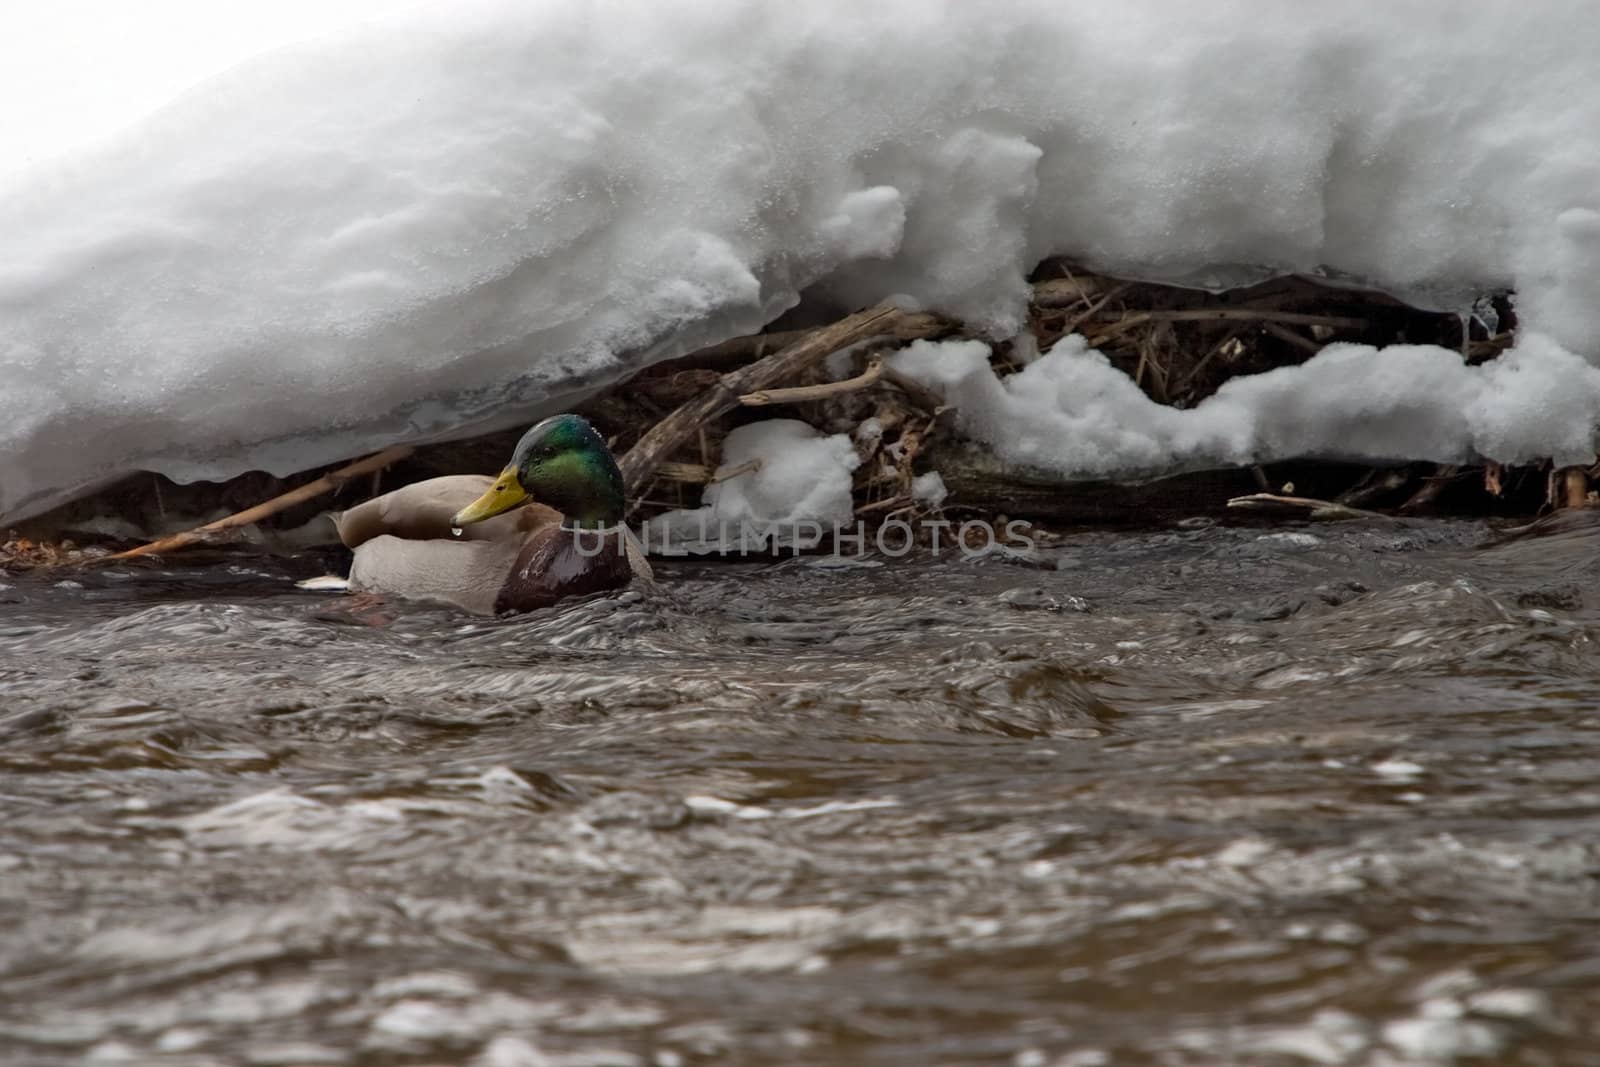 A cold, wet duck swimming in a stream, with an accumulation of snow behind.